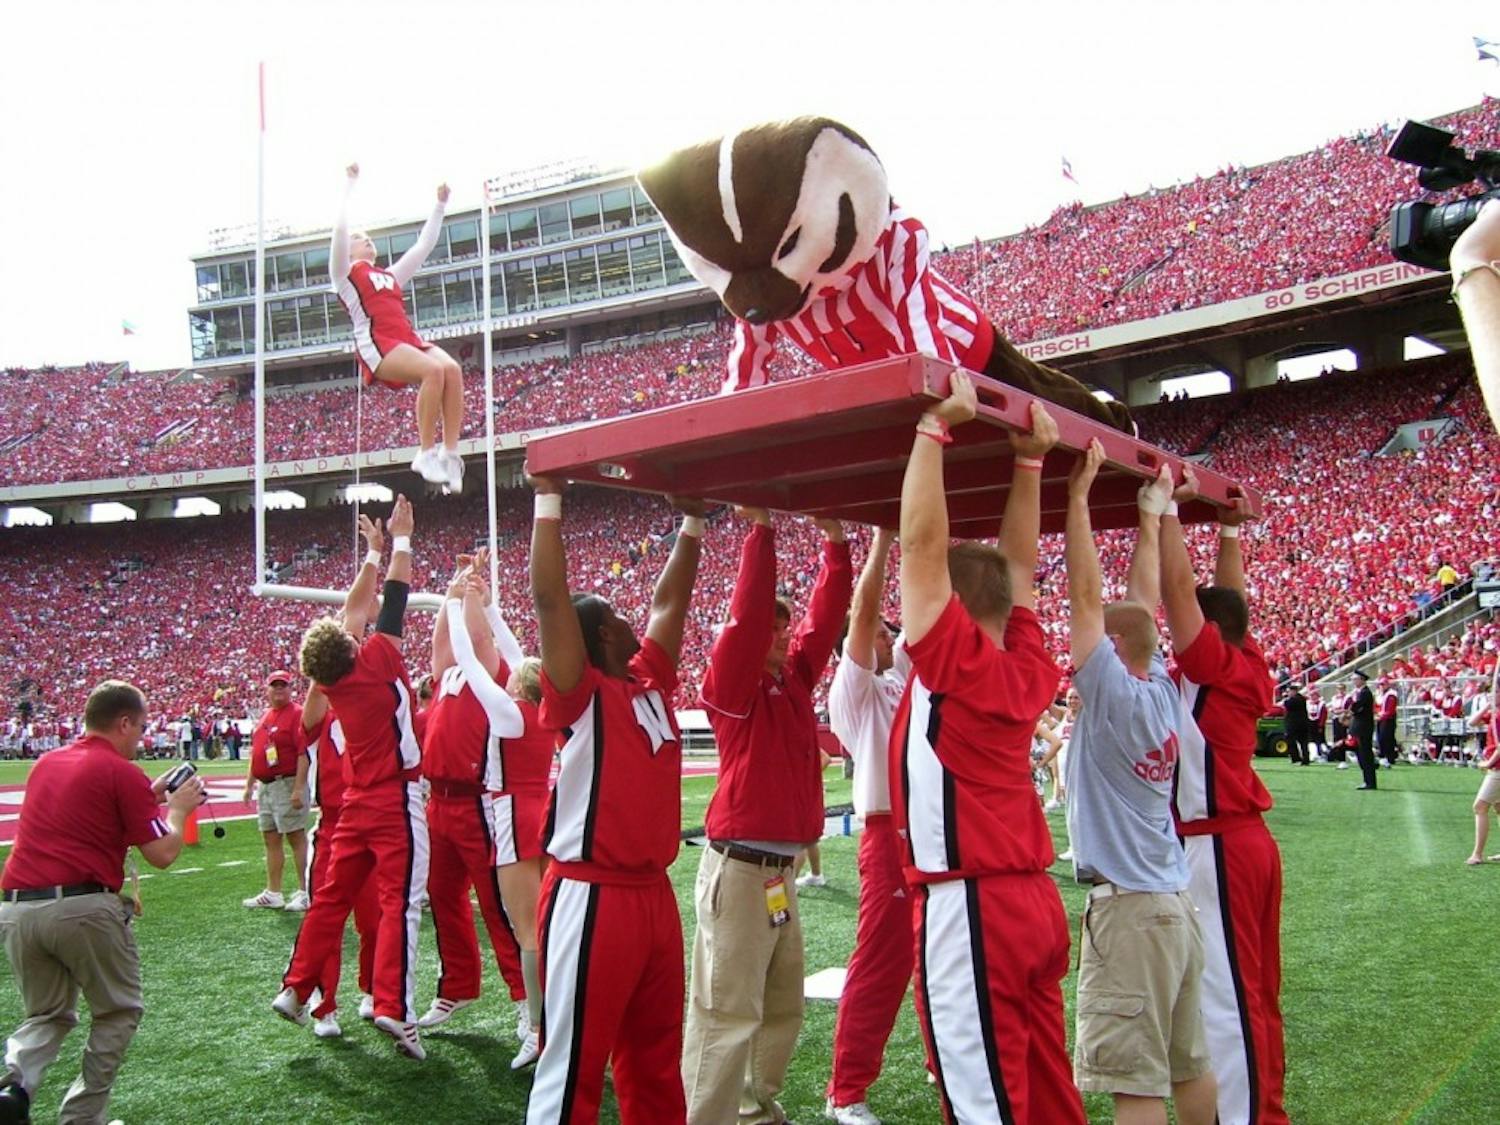 Bucky Badger does pushups